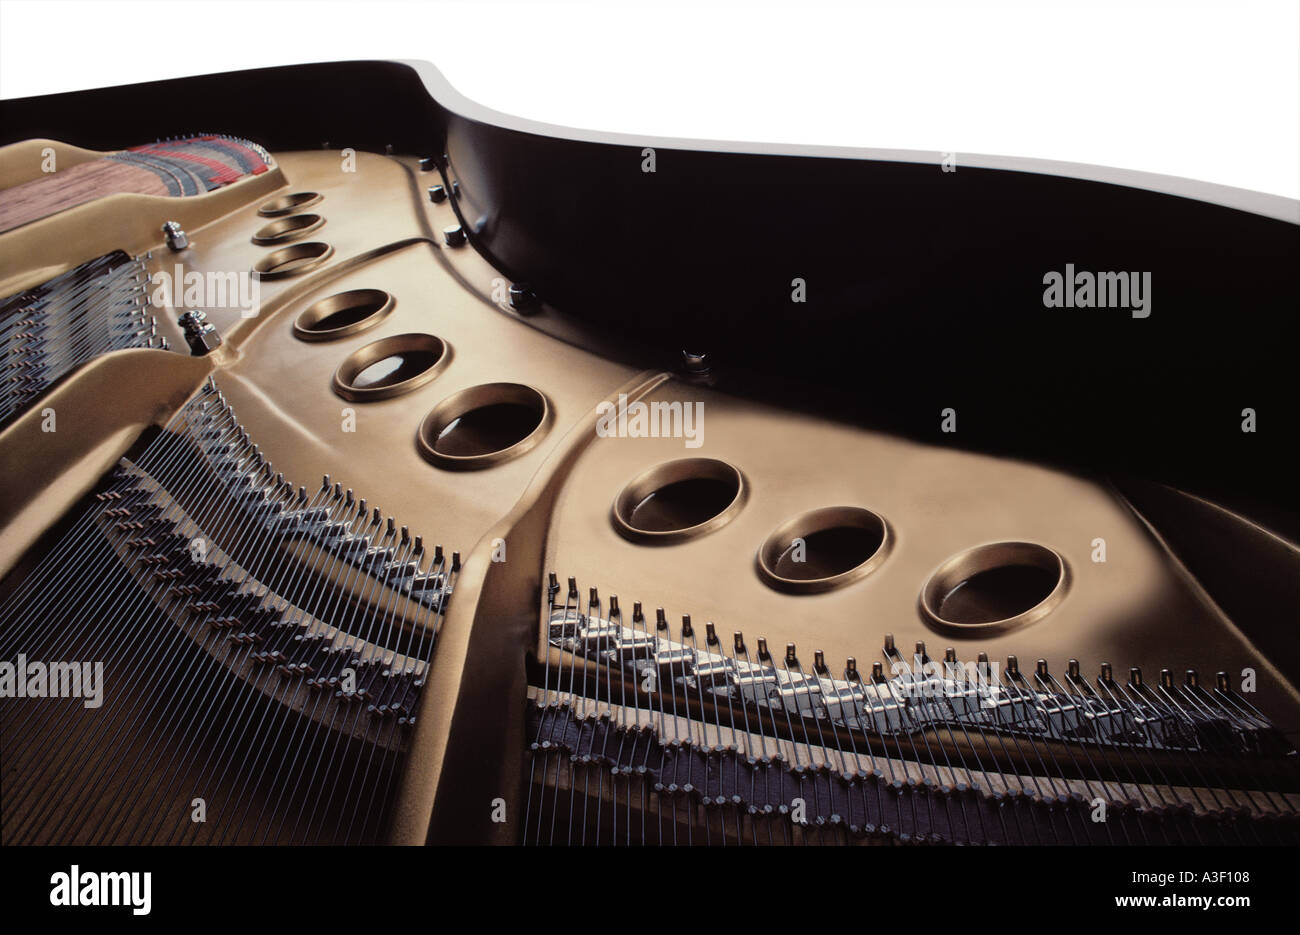 Grand piano interior as abstract form 1 Stock Photo